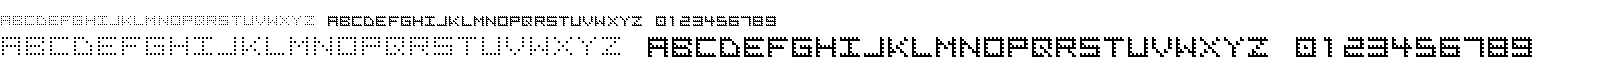 preview image of the Neato font